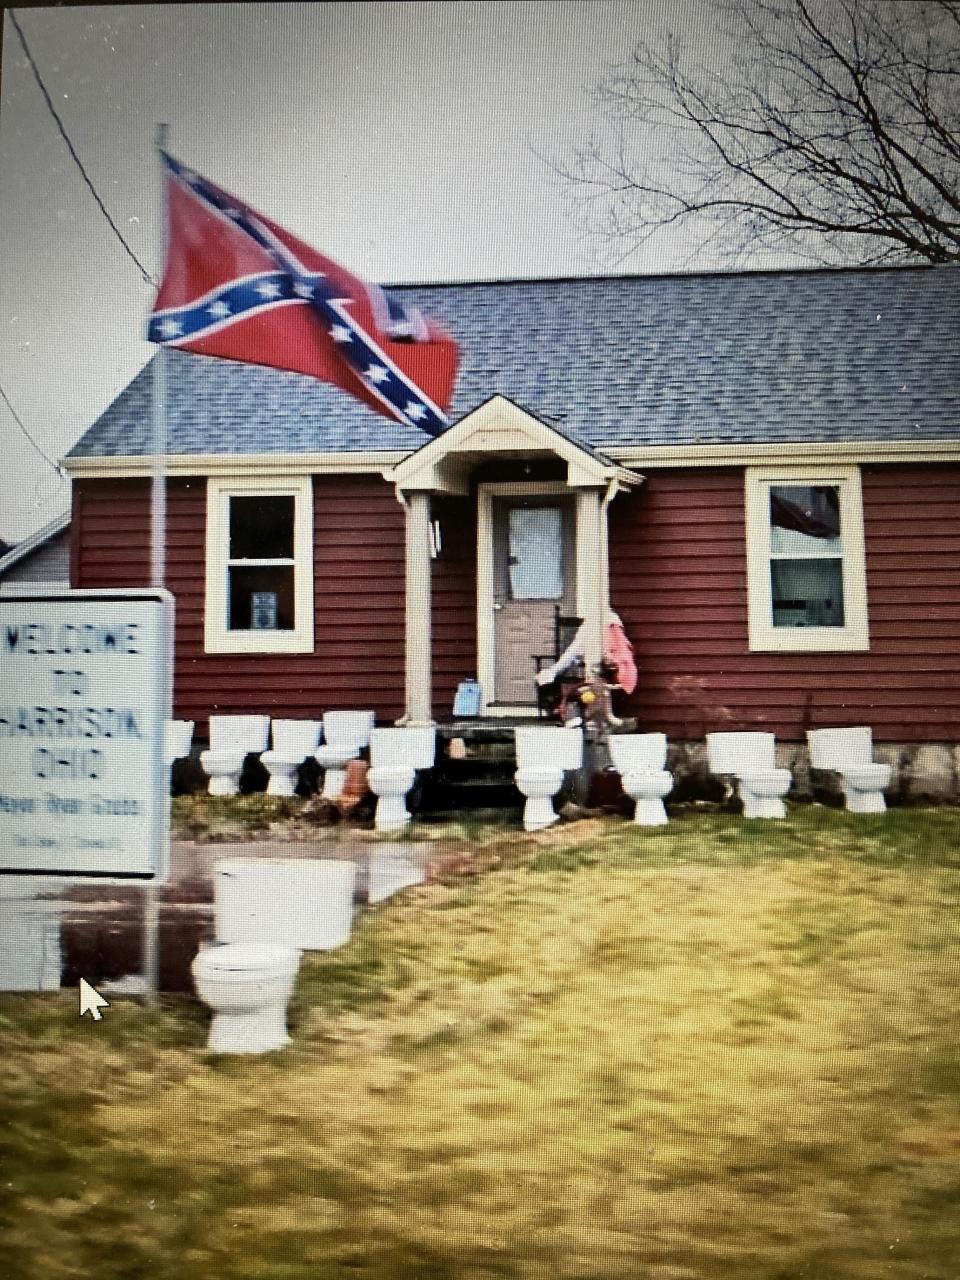 Toilets were added recently to Confederate flag displays on a private property in Harrison, Ohio.